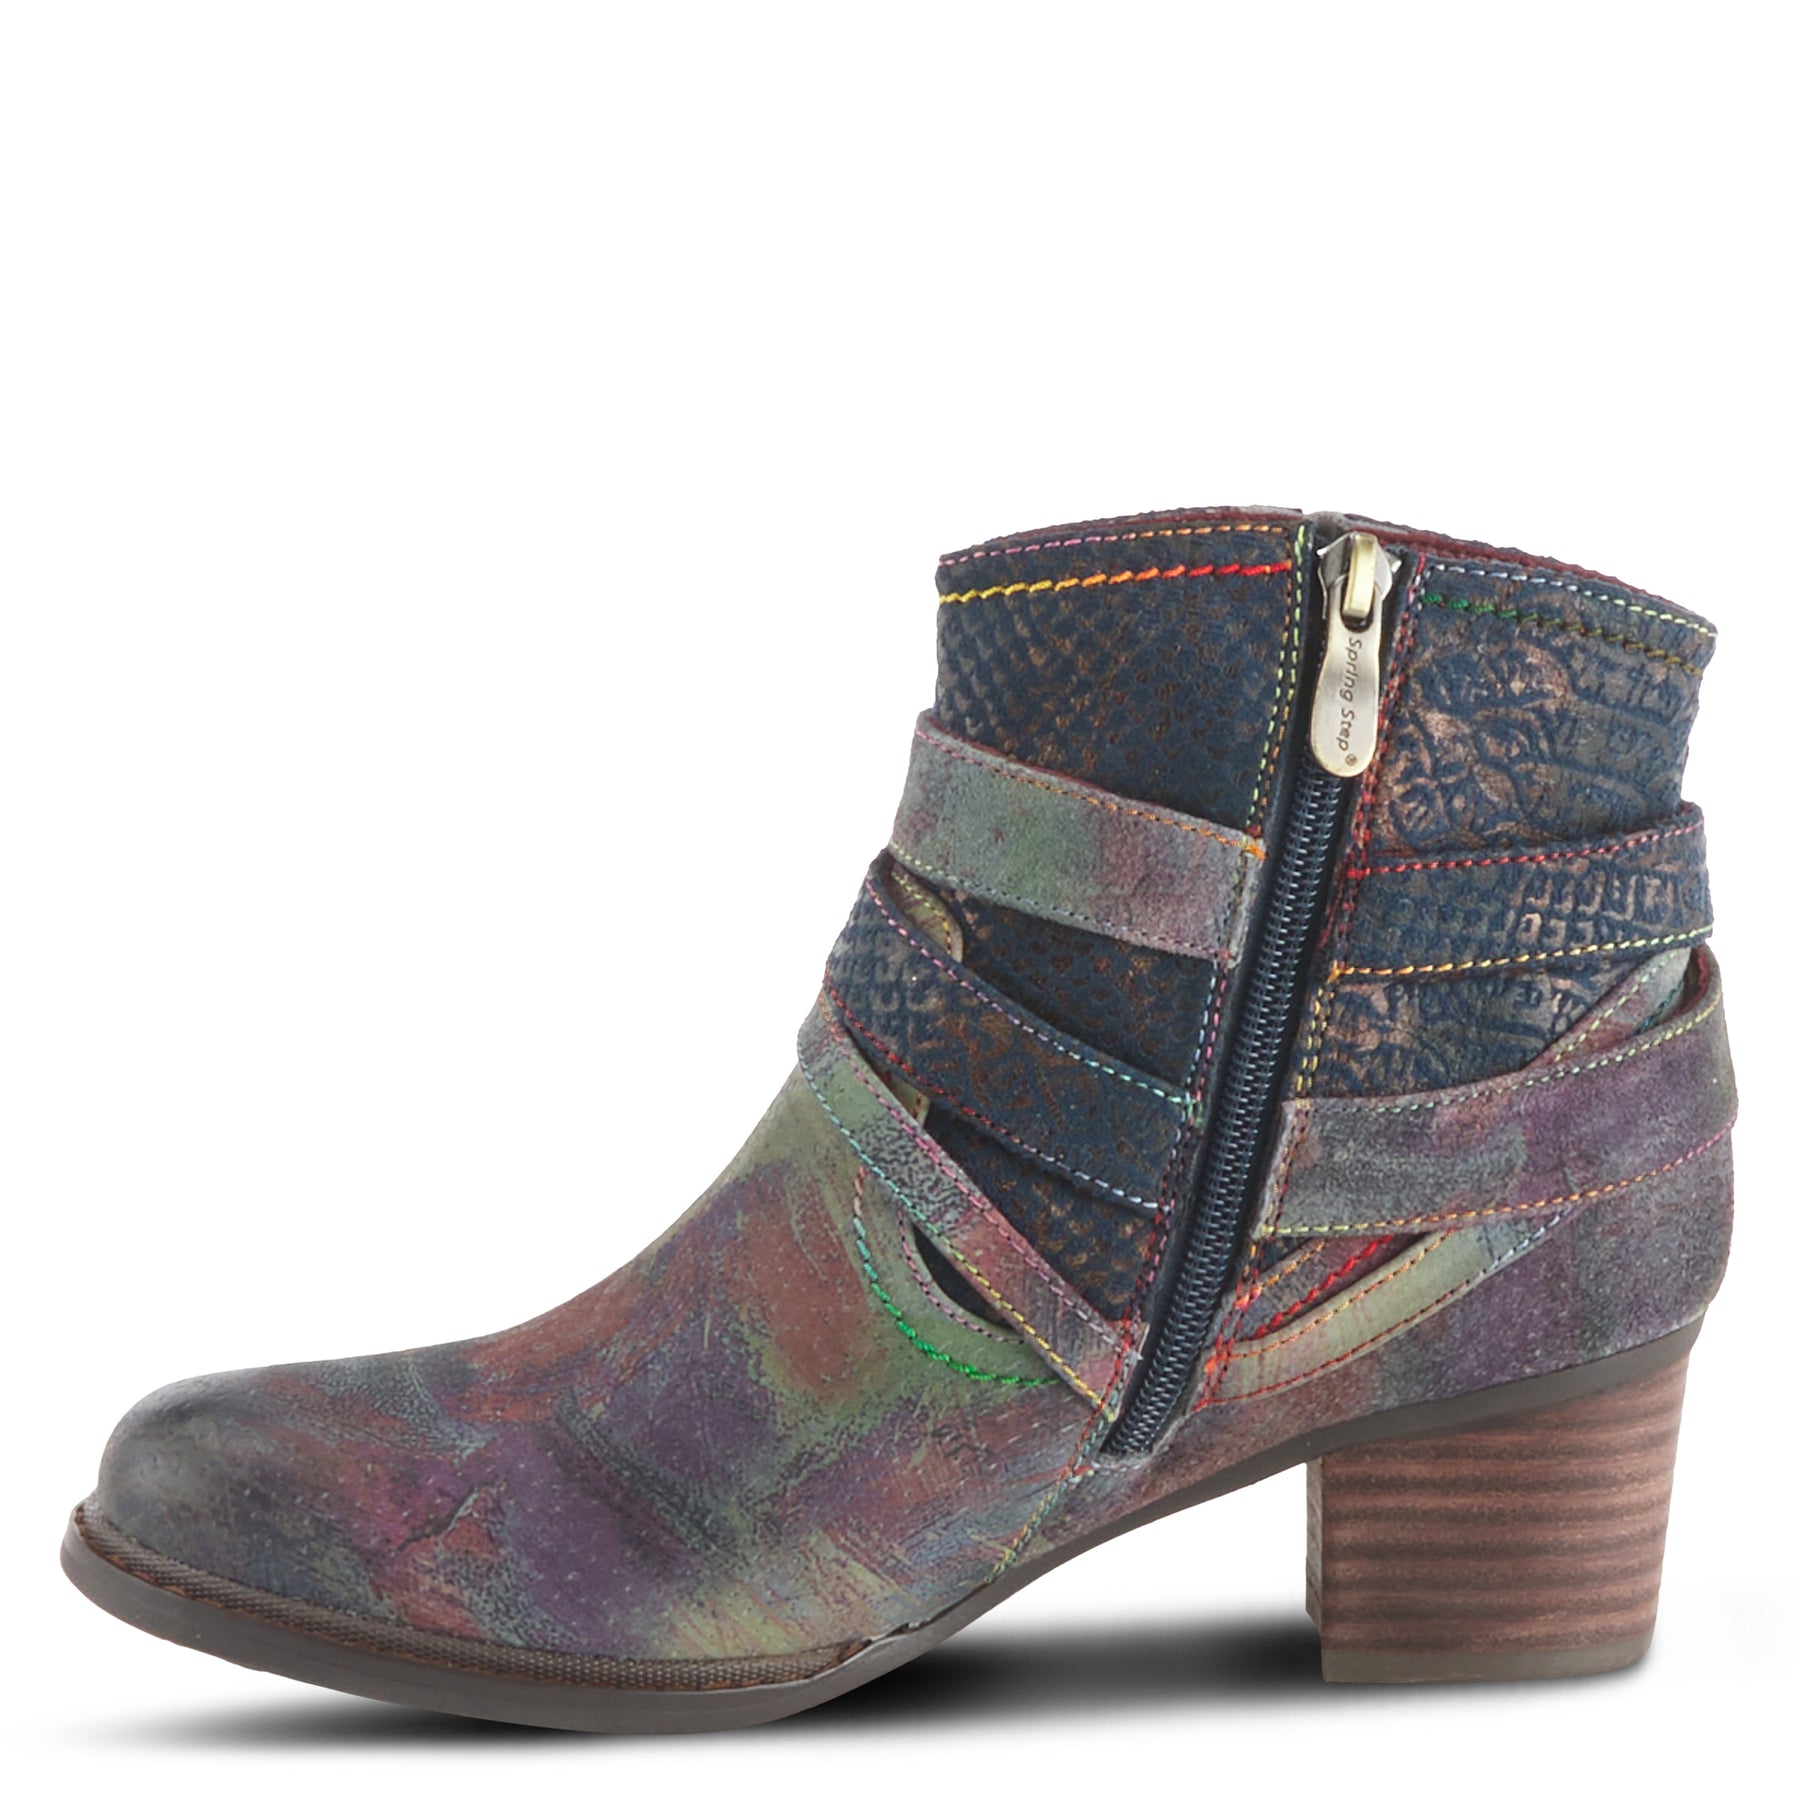 CAMEL SHAZZAM BOOTIE by L'ARTISTE – Spring Step Shoes